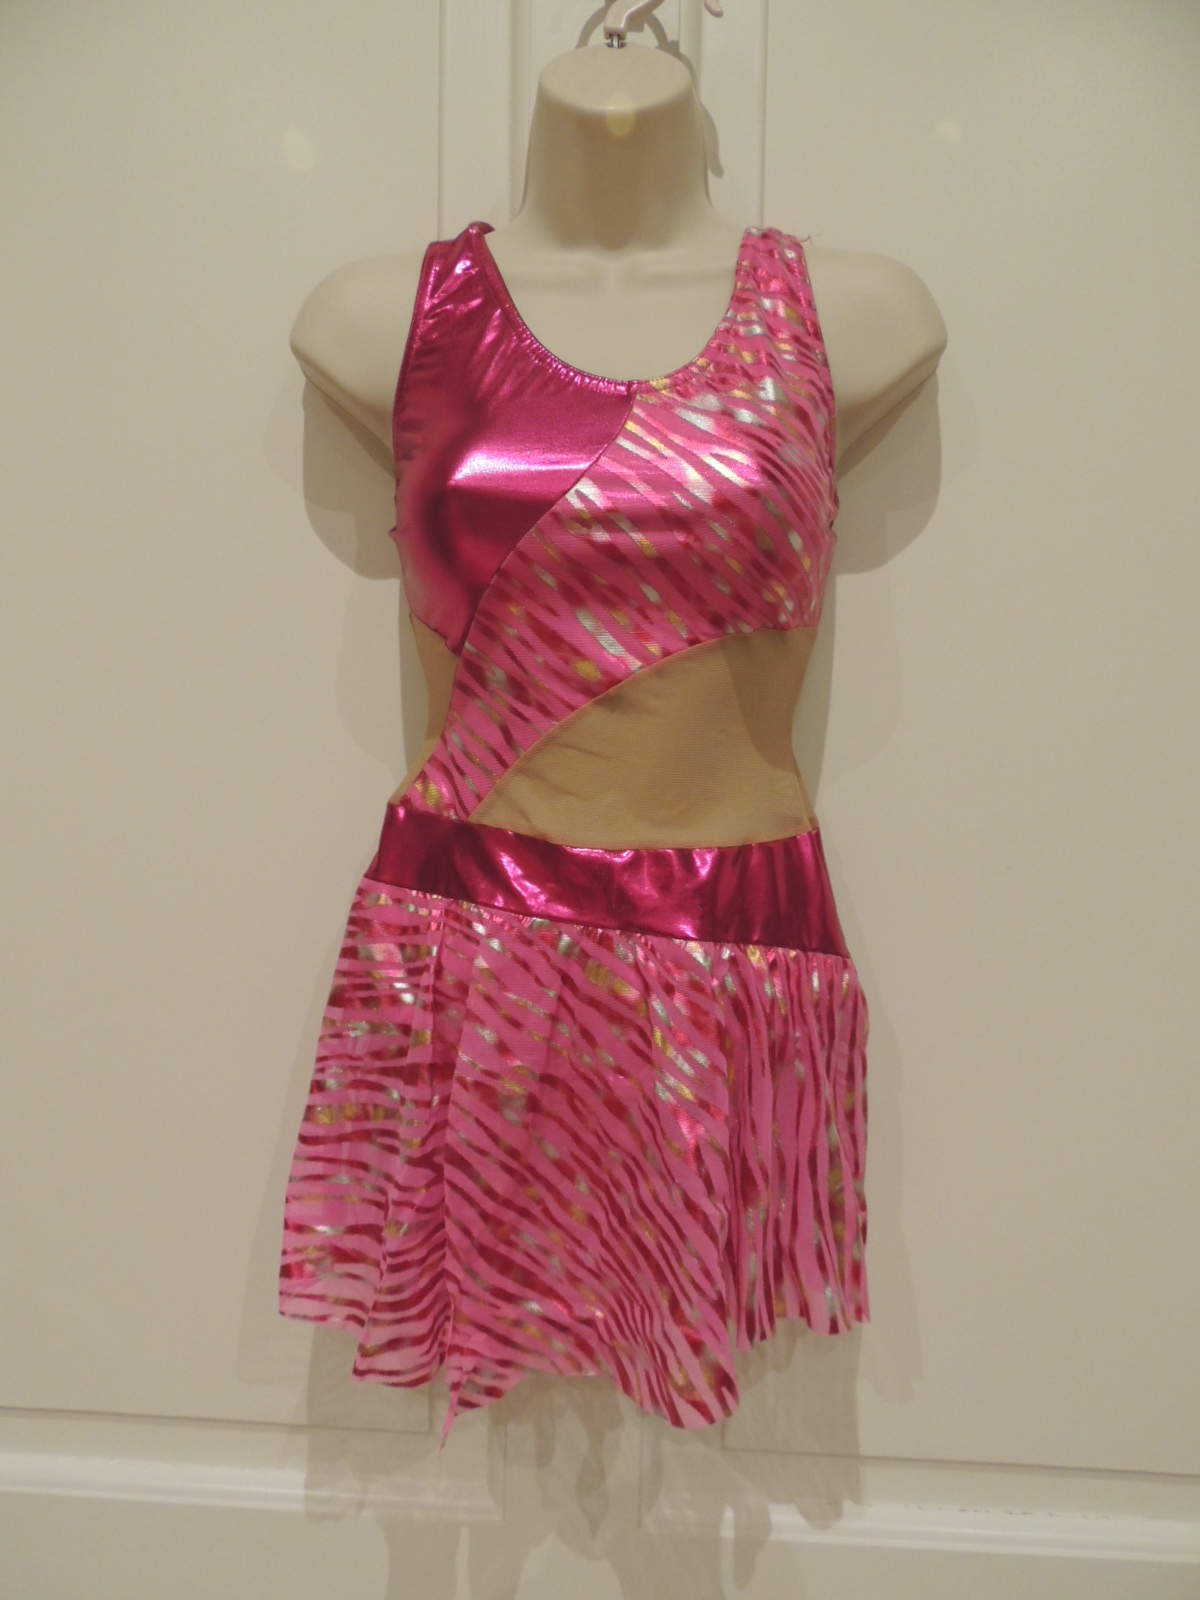 Metallic pink and silver skirted leotard - Suite 109